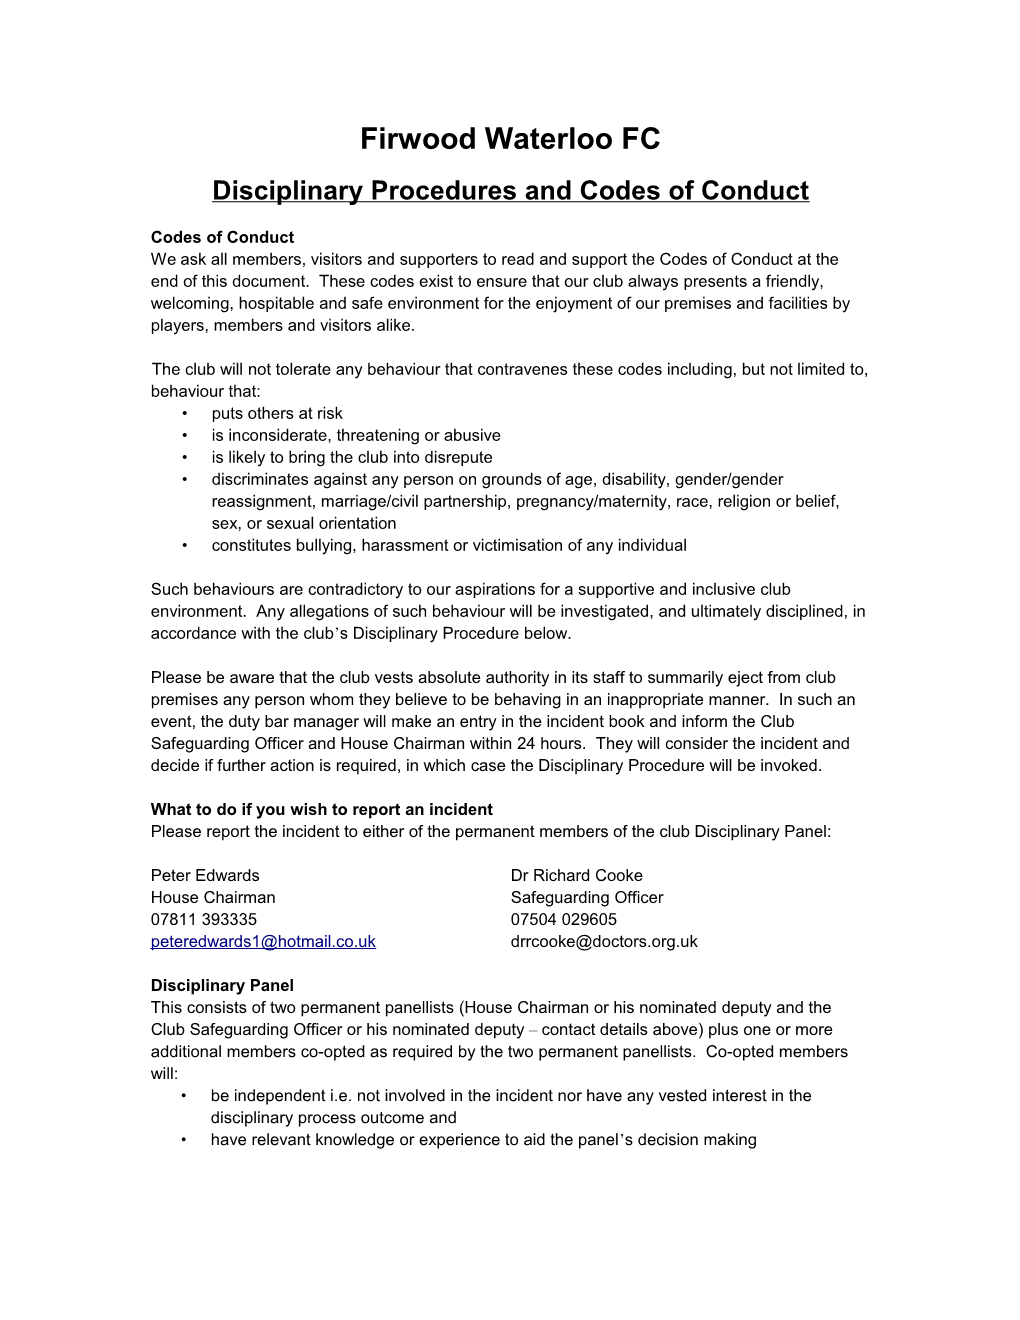 Disciplinary Procedures and Codes of Conduct